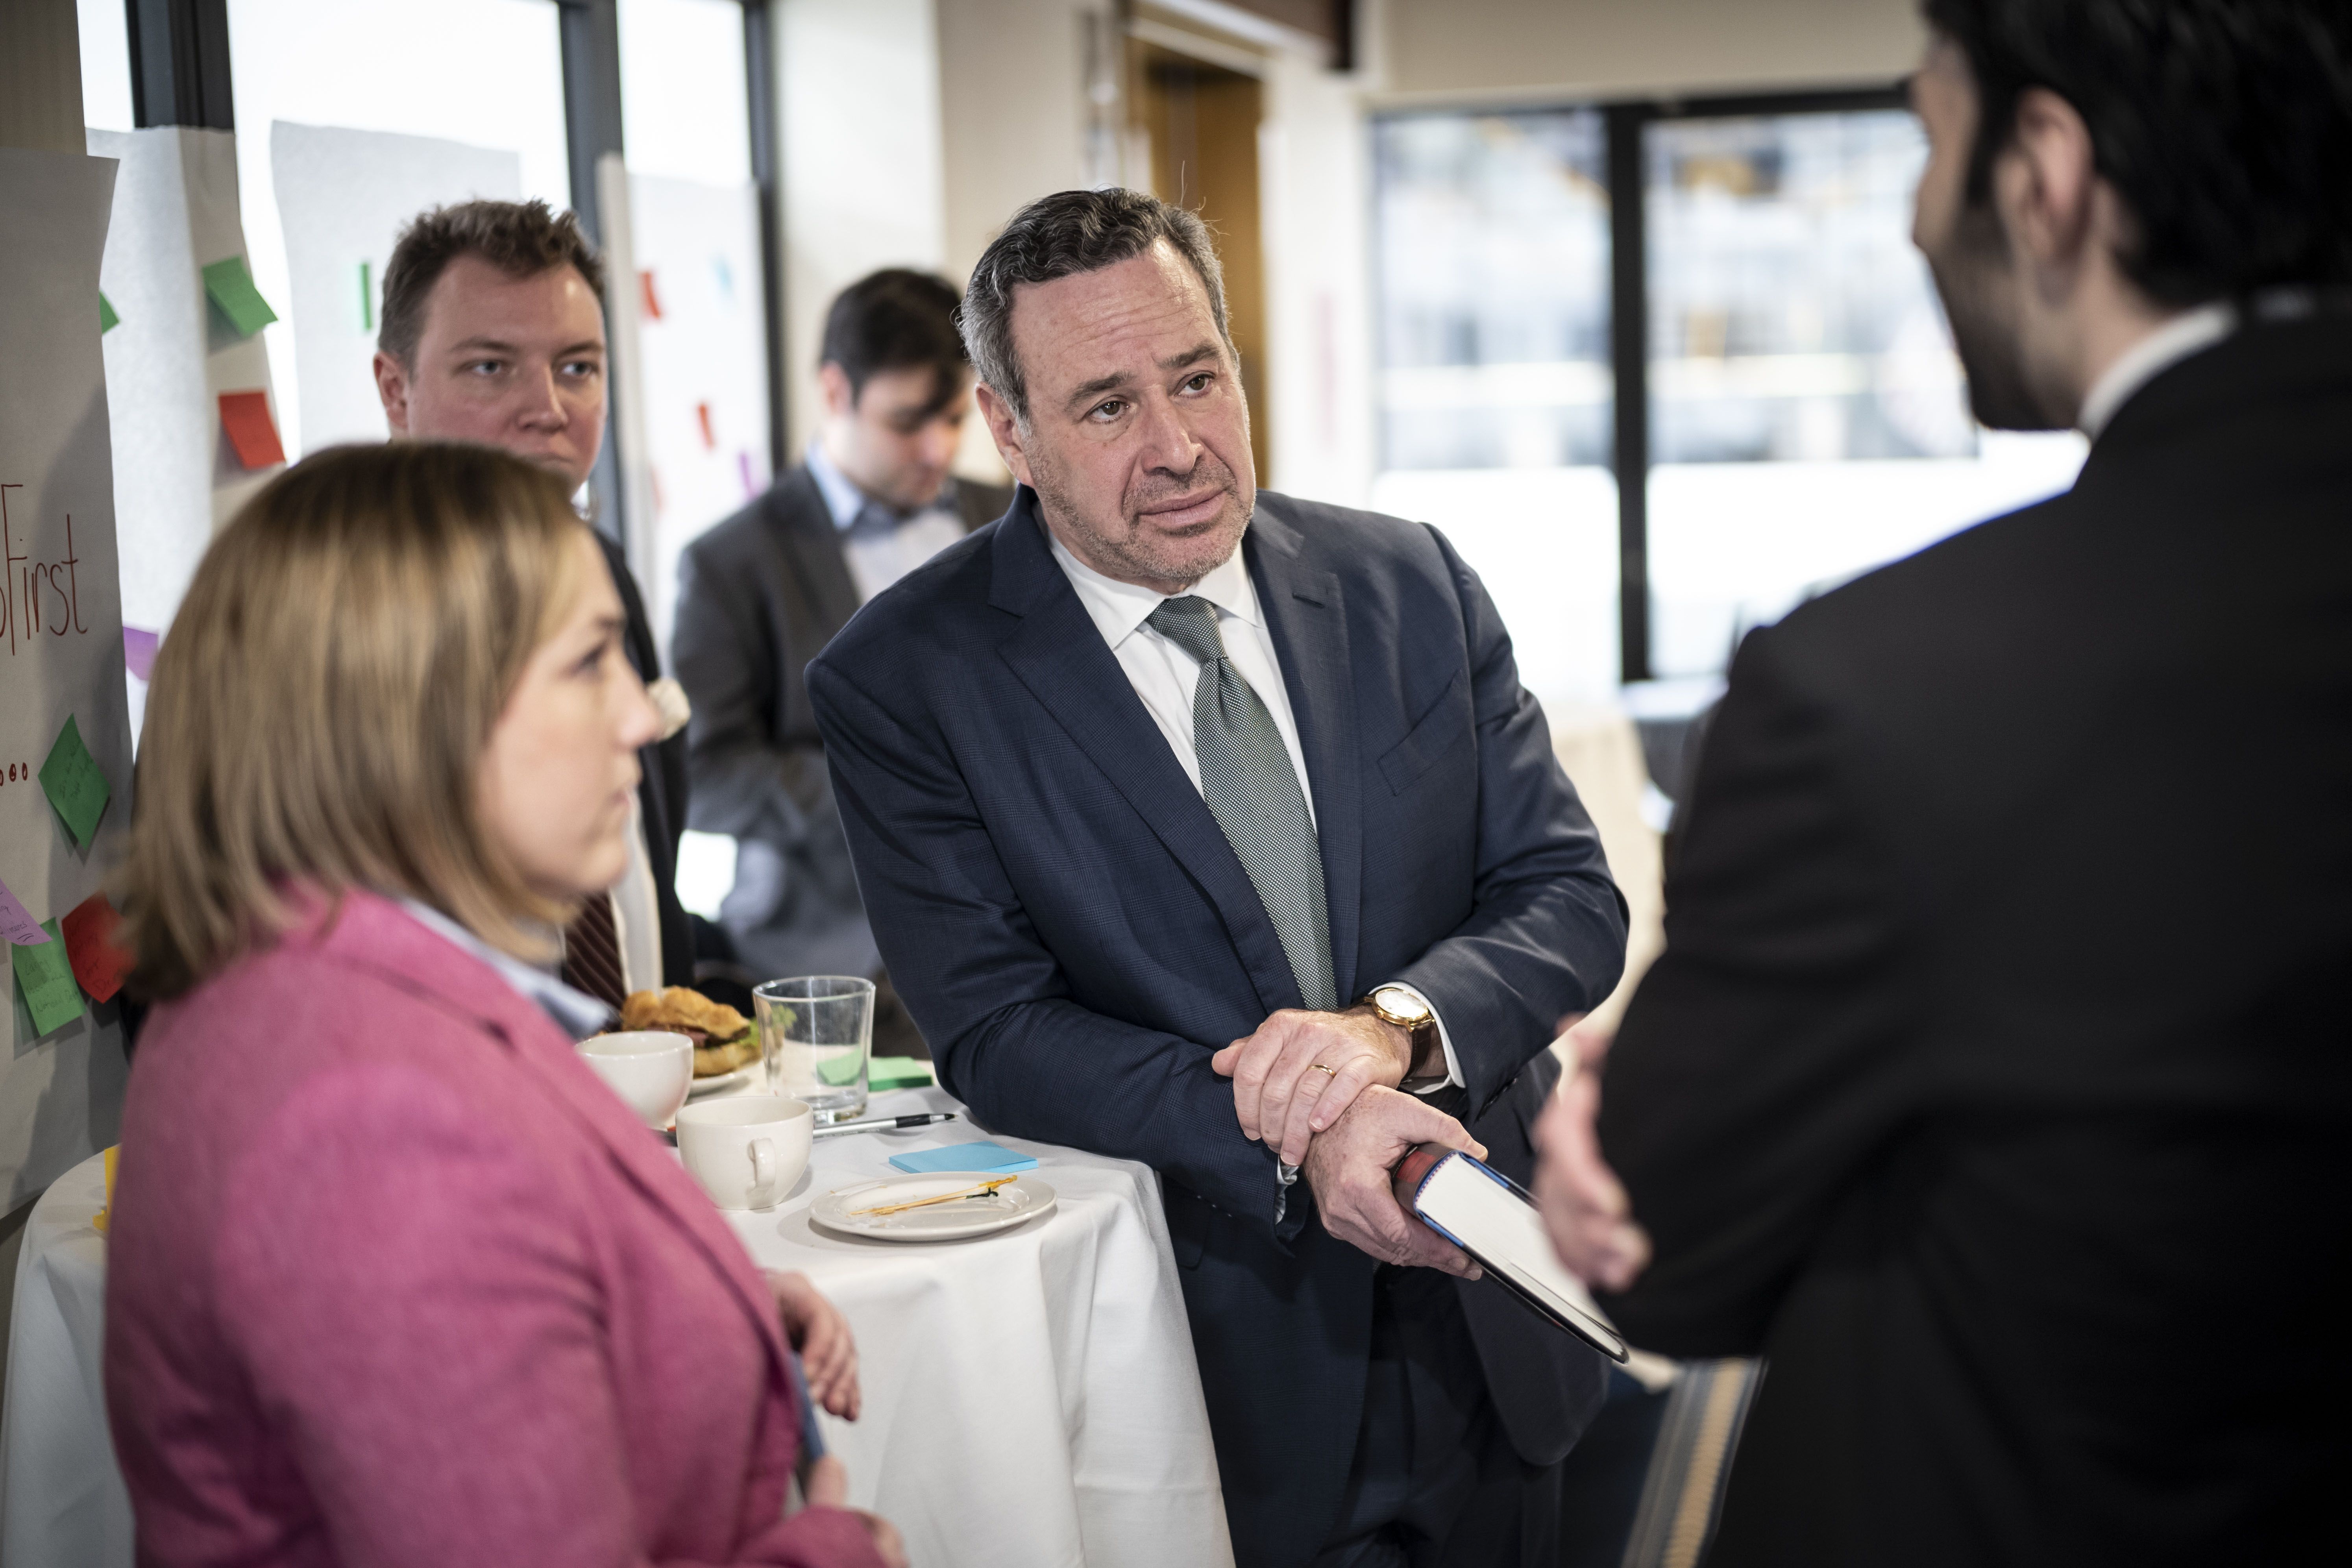 David Frum, a former speechwriter for President George W. Bush and a current senior editor for The Atlantic, speaks with other Never Trumpers.